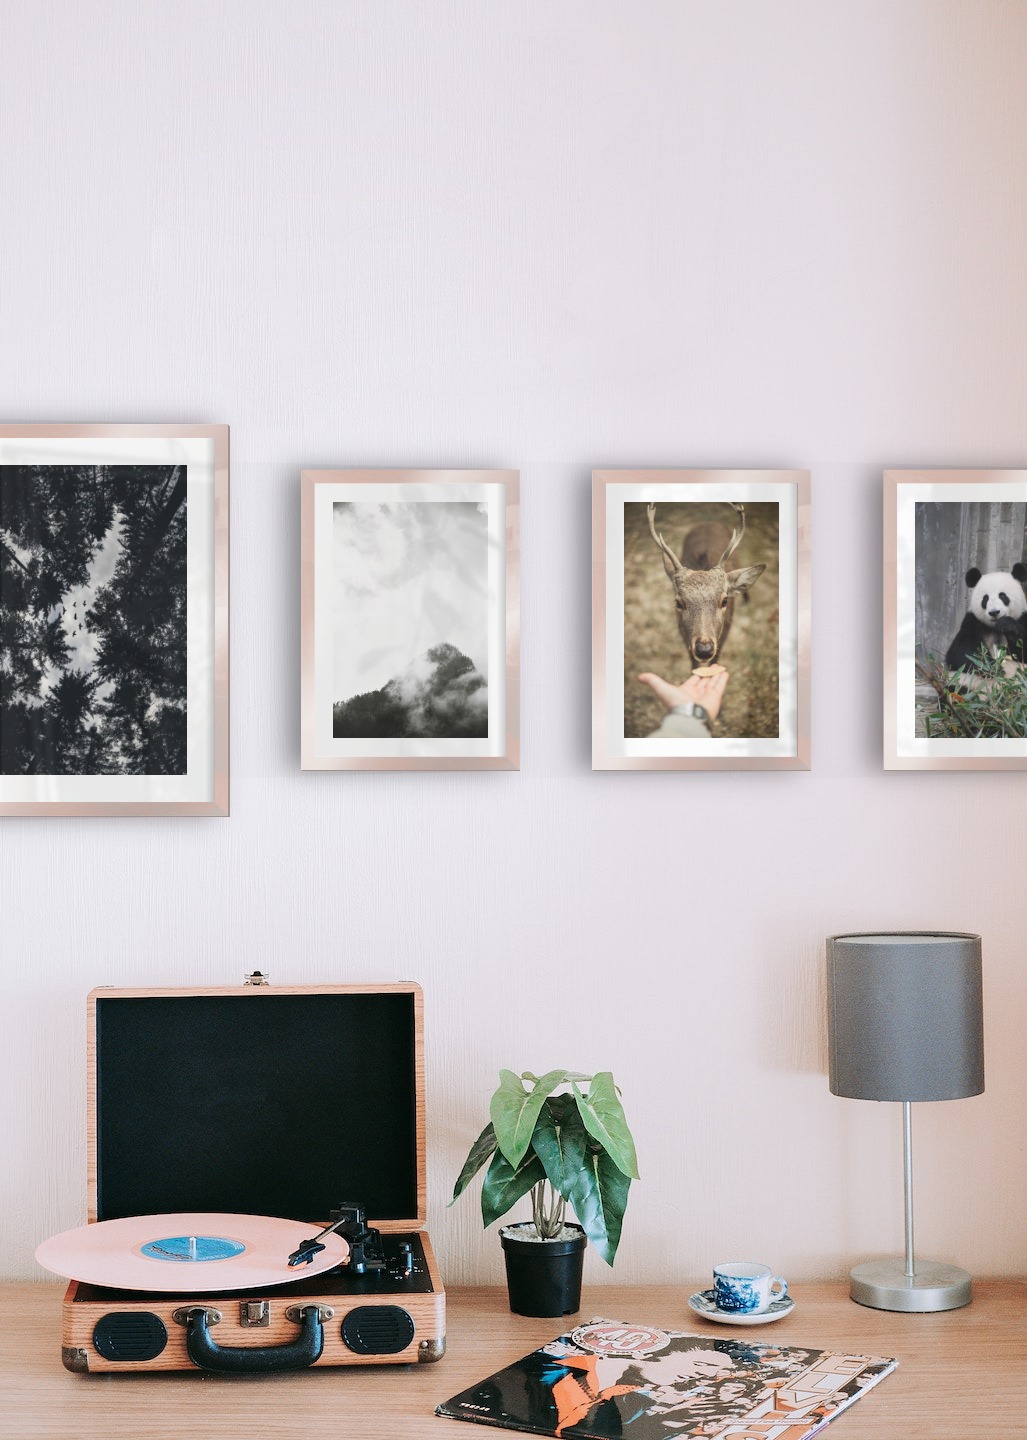 Gallery wall with picture frames in copper in sizes 30x40 and 21x30 with prints "Wooden tops and birds", "Trees and mountains in fog", "Feed a deer" and "Panda"